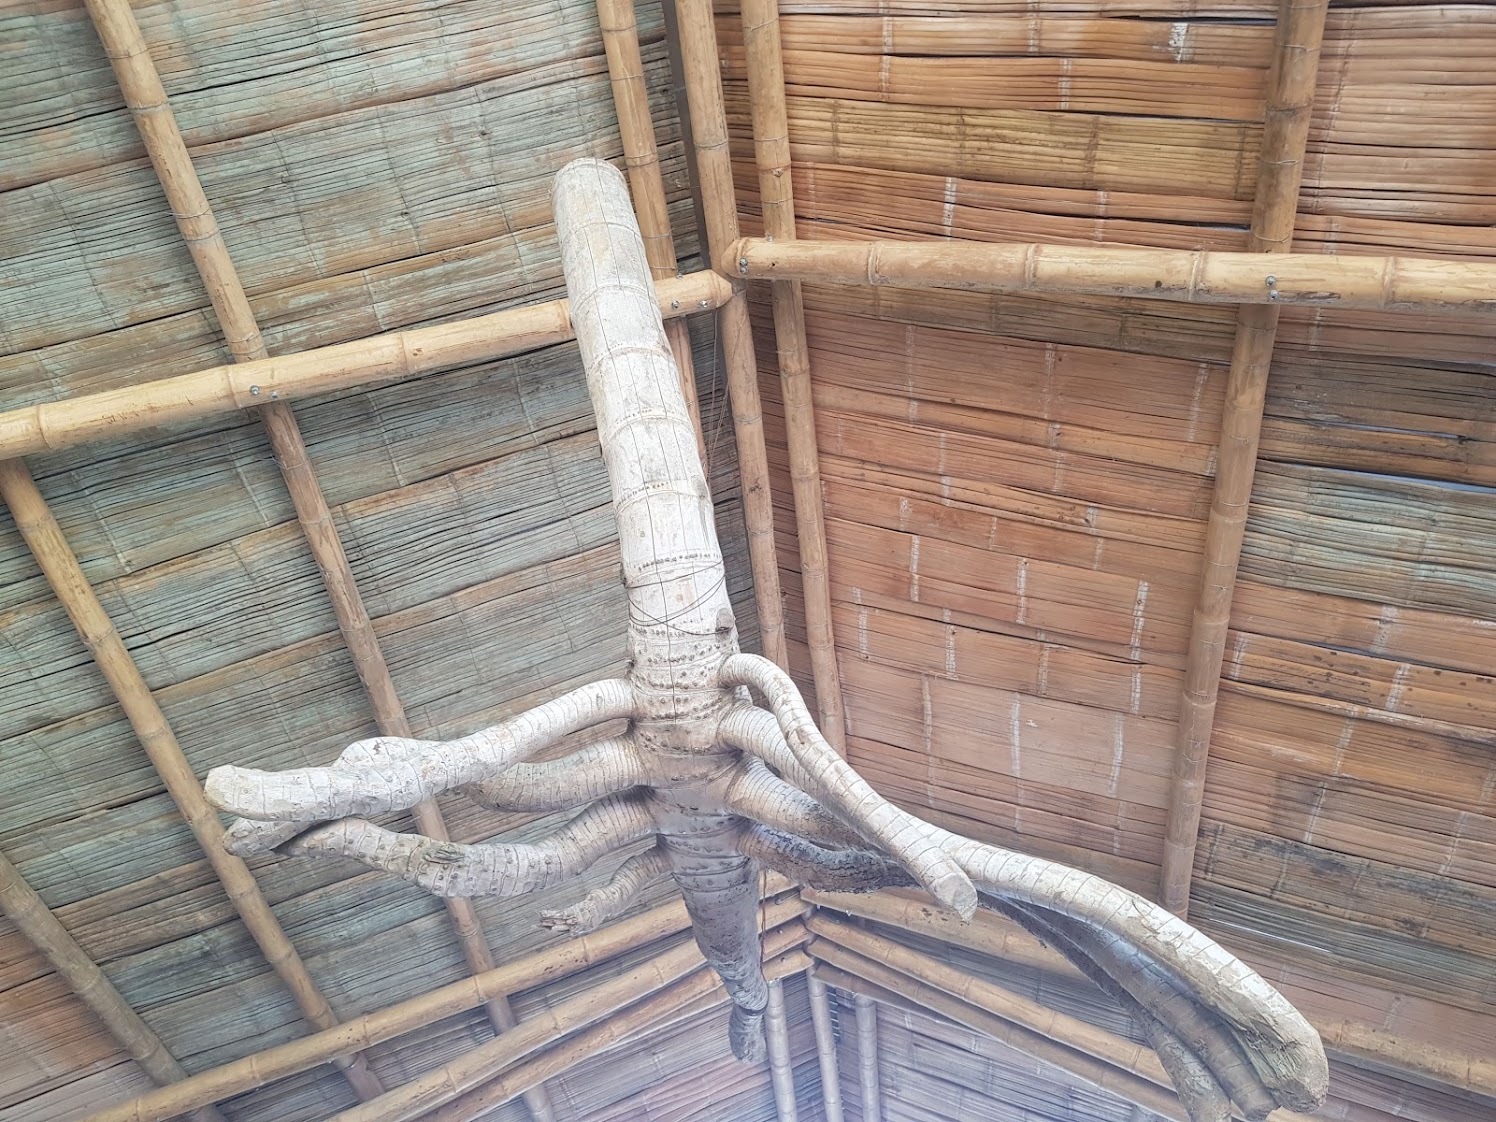 Bamboo as a building material